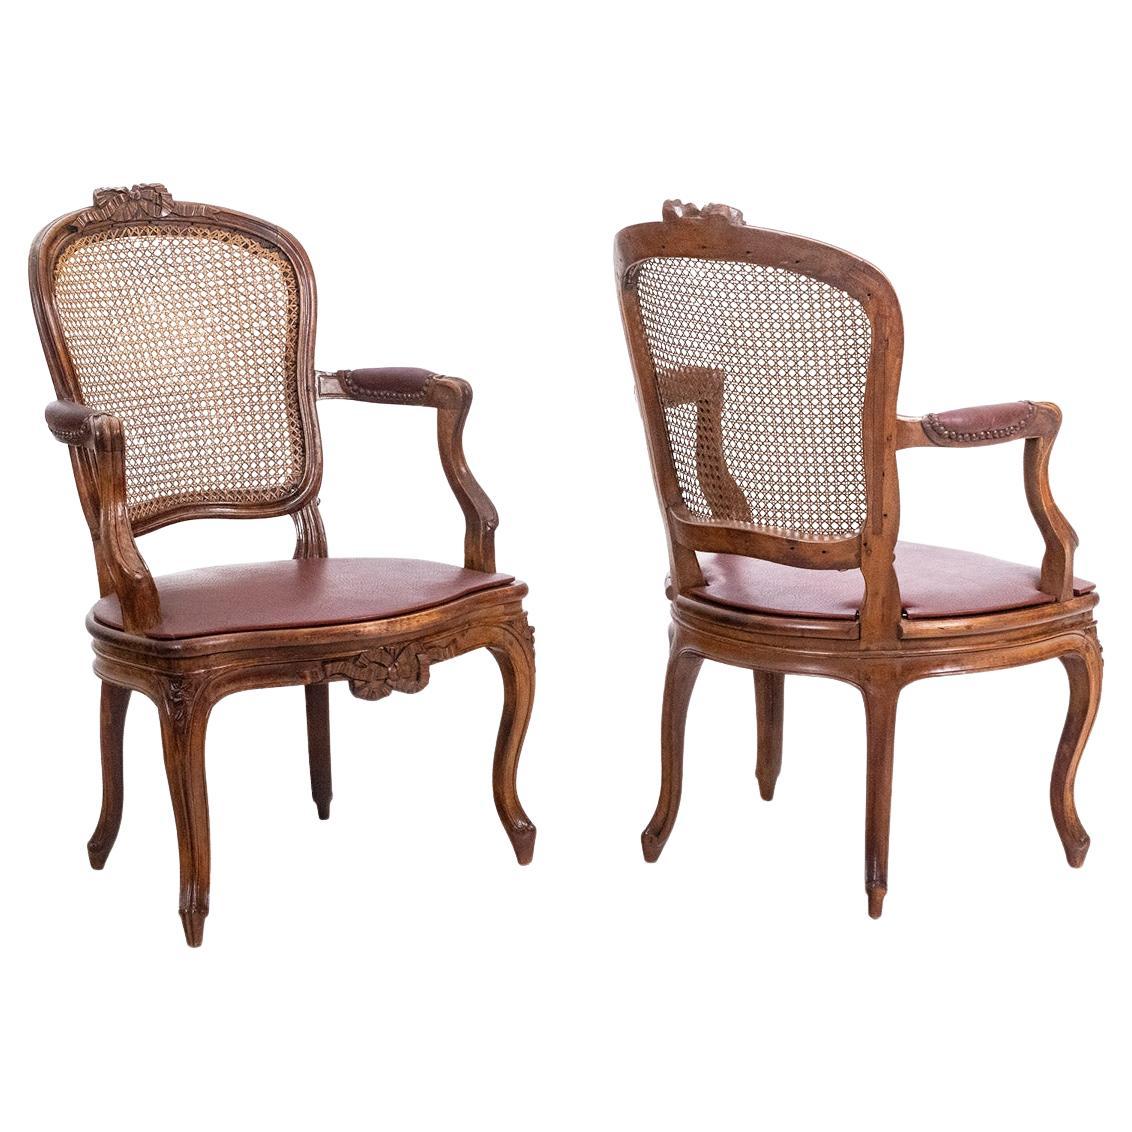 Pair of “cabriolet” armchairs in walnut and canework. Louis XV period. LS5209325 For Sale